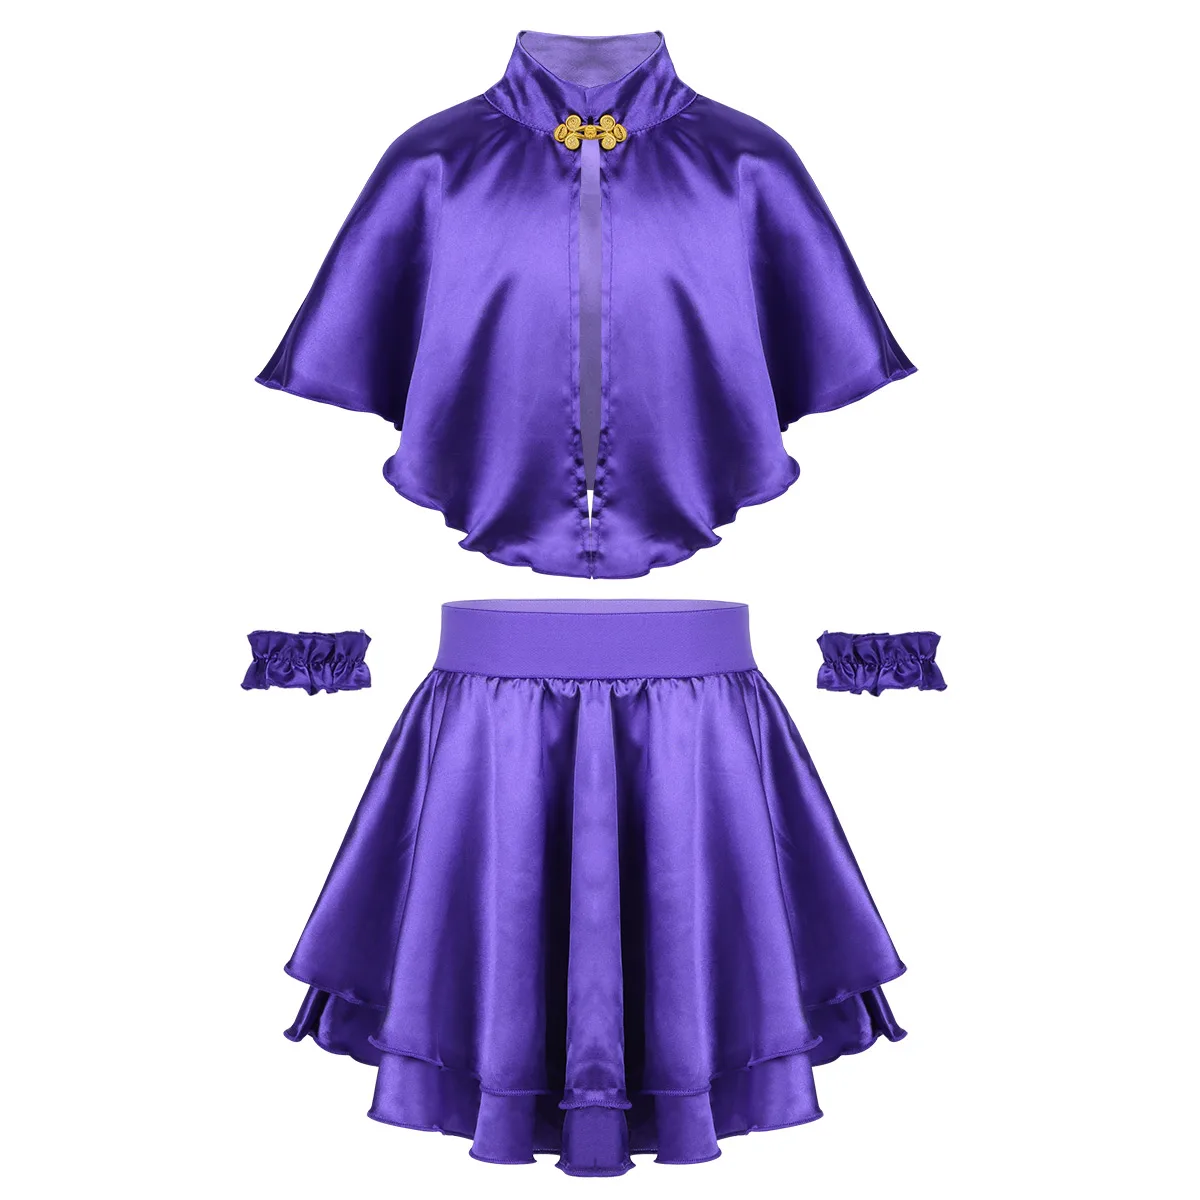 ChicTry 3pcs Kids Girls Children Cosplay Outfits Showman Role Play Party Costumes Cape With Skirt And Wristband Fancy Dress -Outlet Maid Outfit Store HTB1BBzAX2fsK1RjSszgq6yXzpXaN.jpg